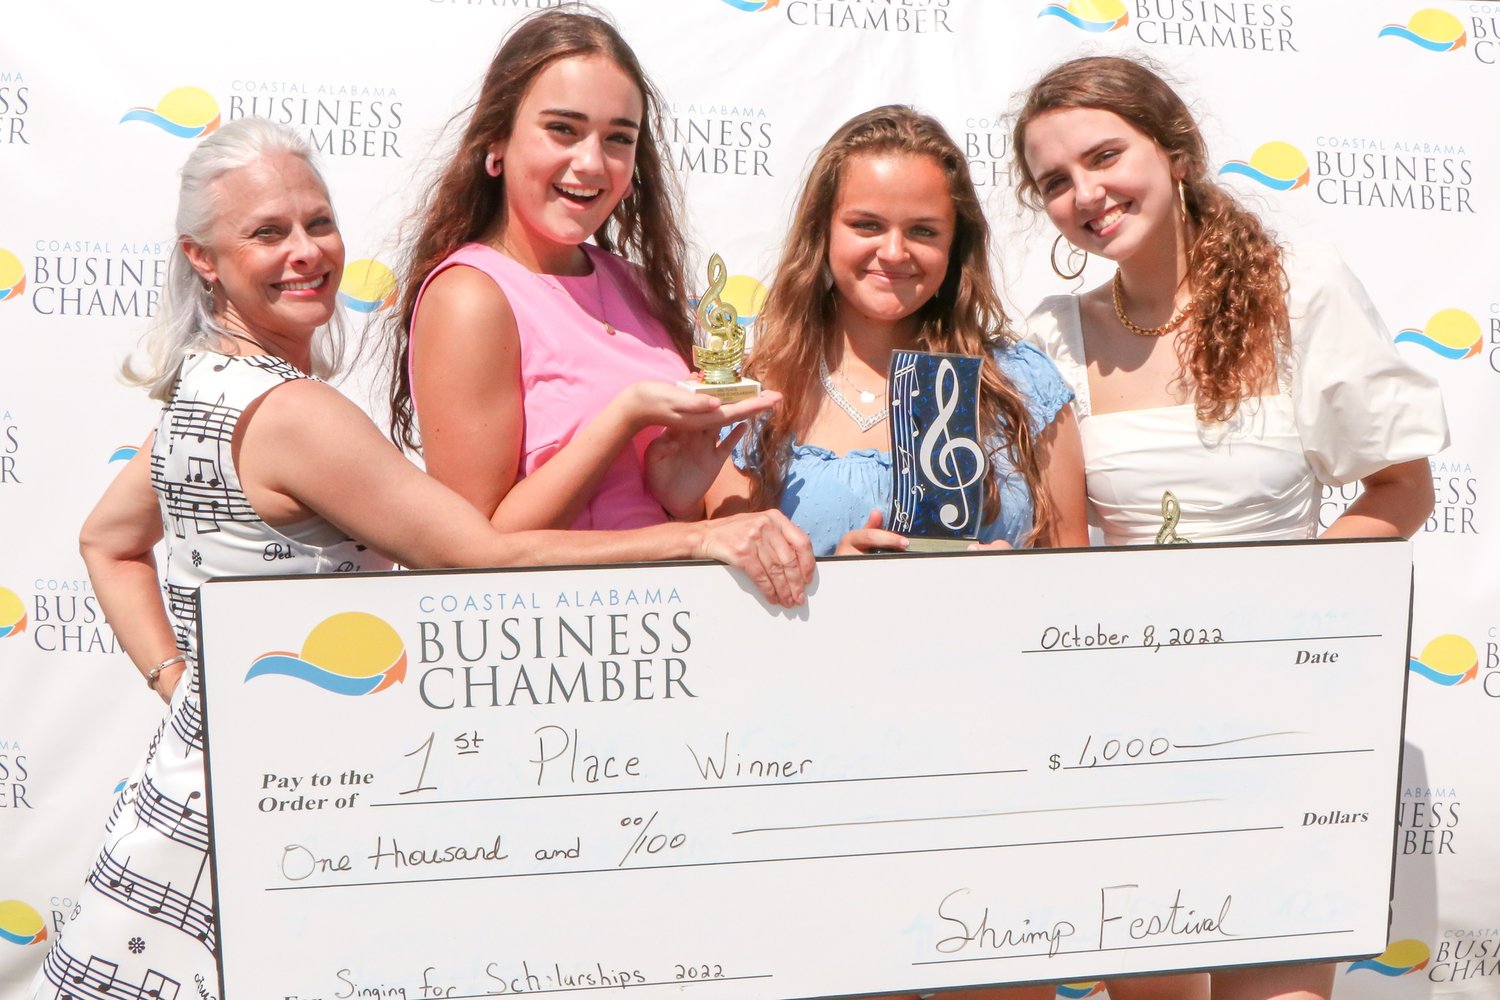 Chairperson Allison Pryor presents the $1,000 check to the 2022 Singing for Scholarships winner Maura Hawkins of Gulf Shores High School. She is joined by second place winner Victoria Holley of Spanish Fort High School and Luiza Salazar from Orange Beach High School.